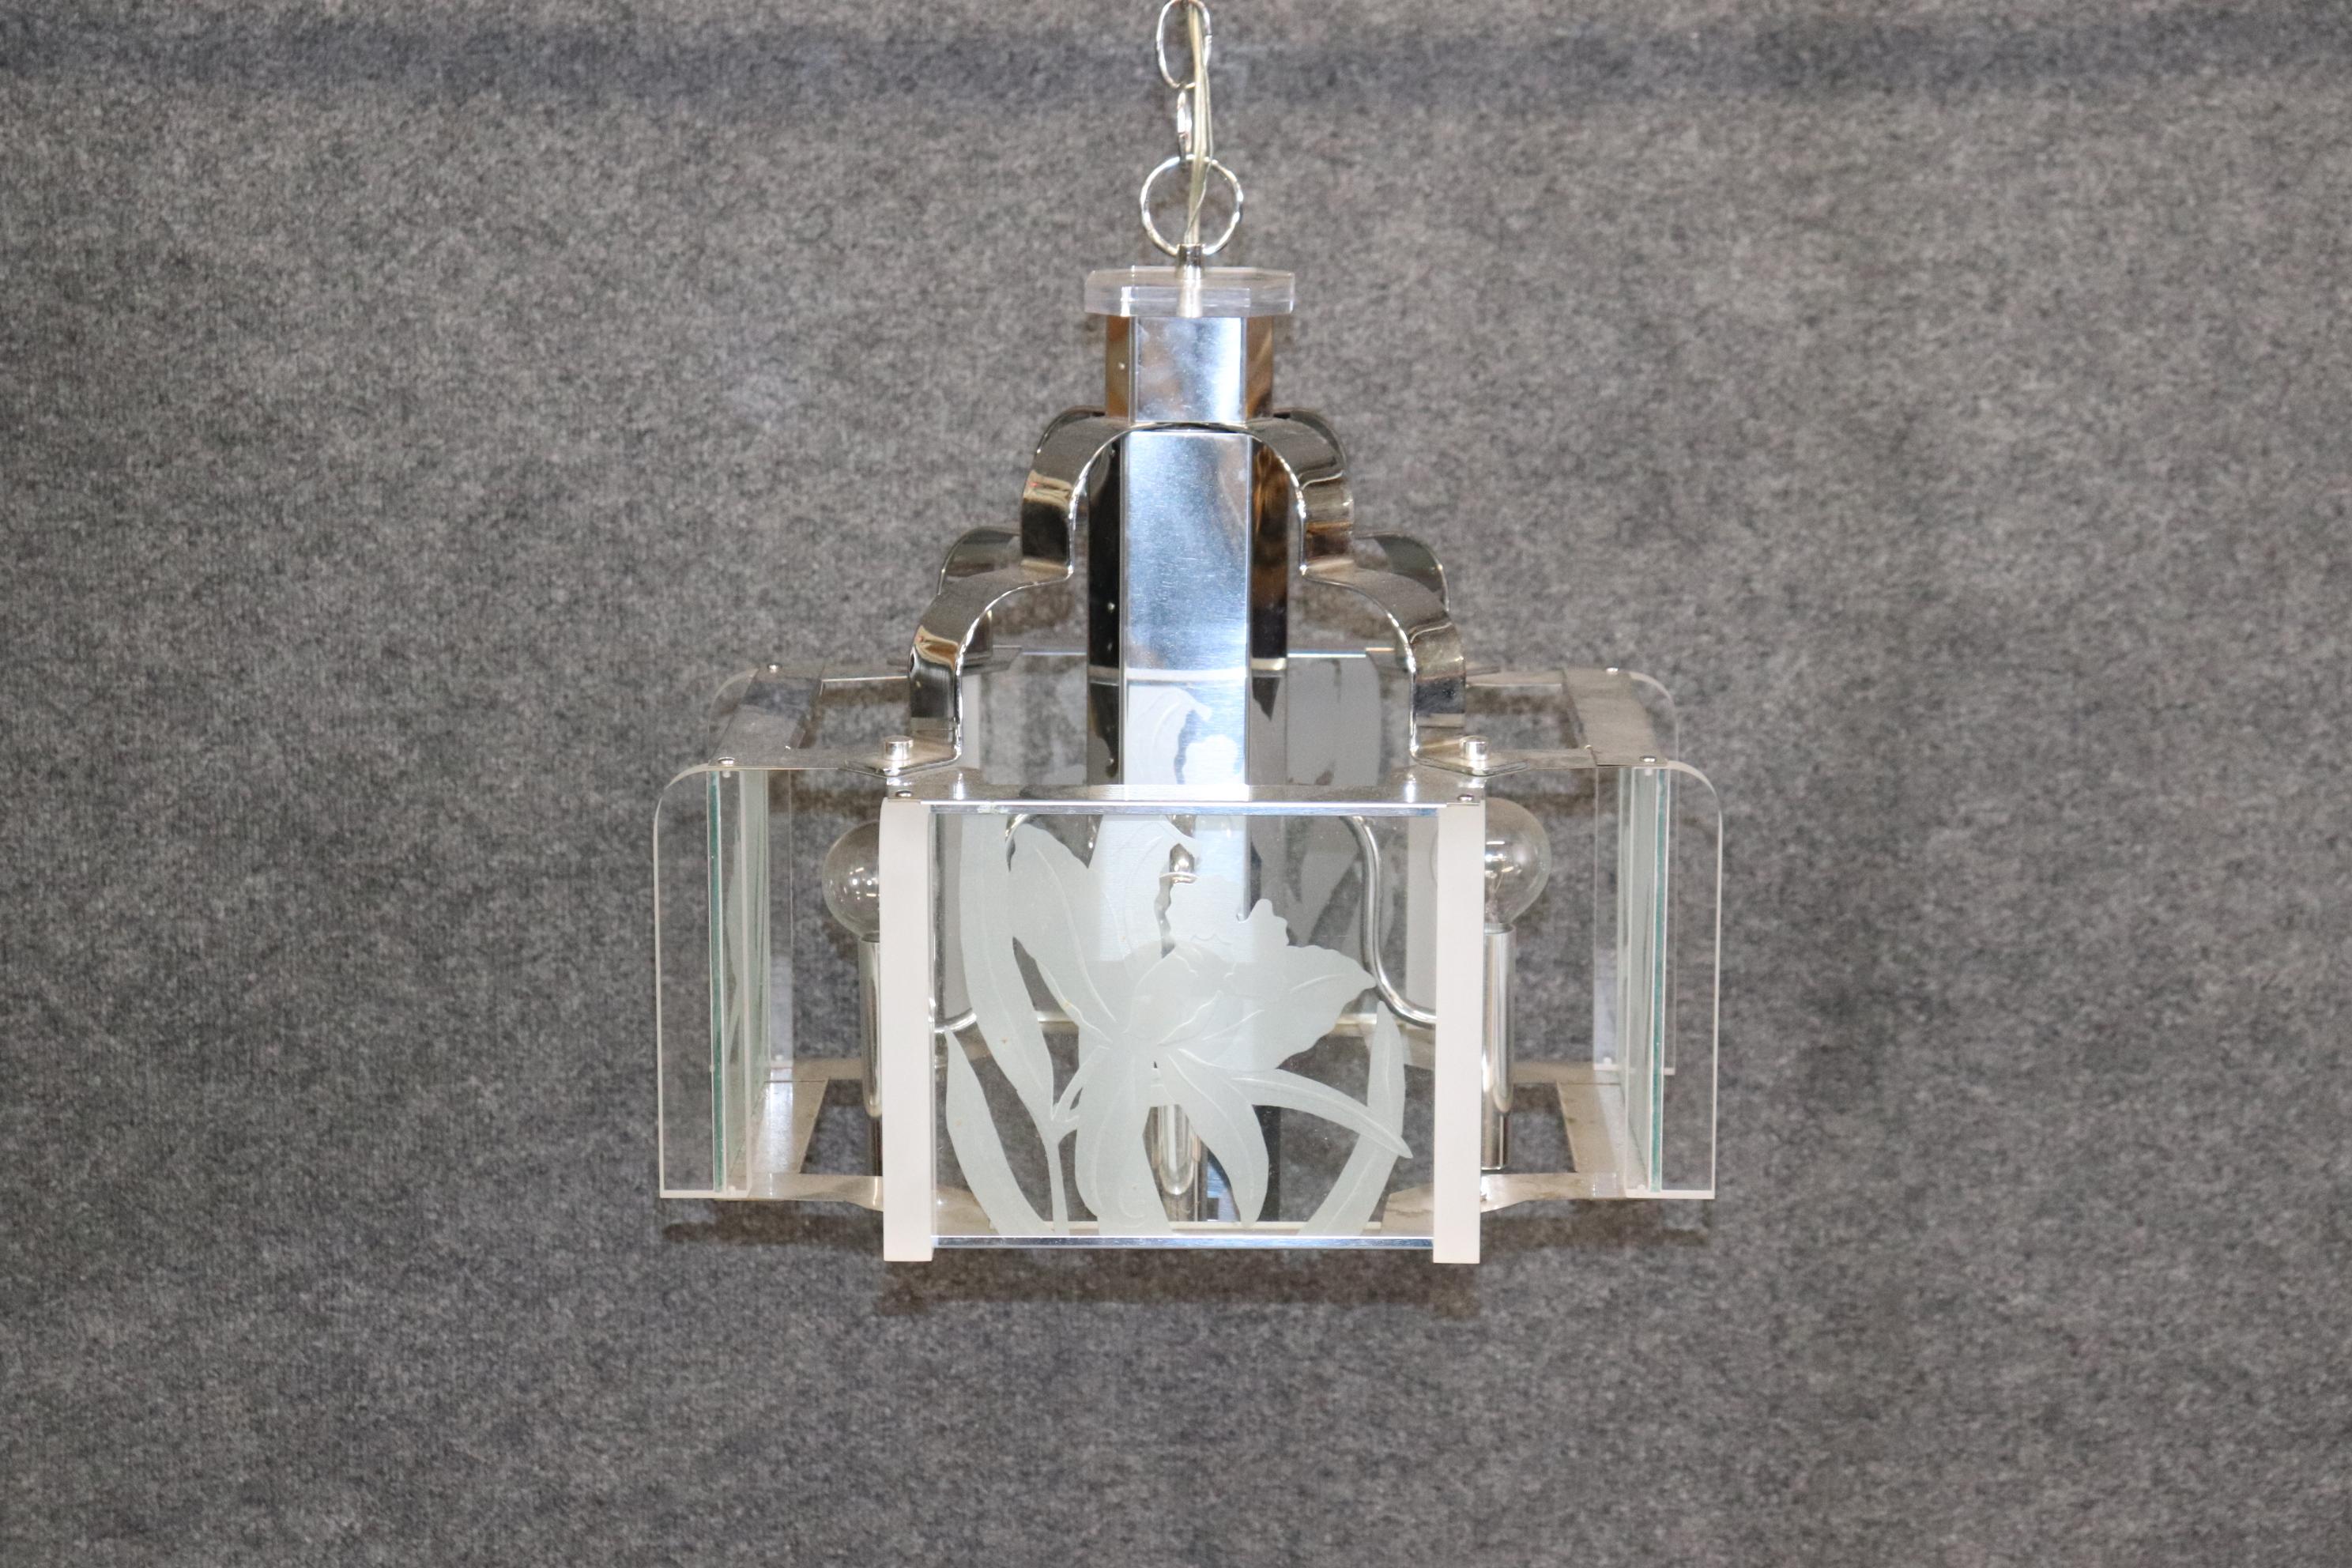 Dimensions- H: 18in W: 17in D: 17in

This vintage Frederick Raymond Art Deco style four light chandelier is something to be seen! Fredrick Raymond is a well-known brand that produces high-end lighting fixtures, including chandeliers. They are known